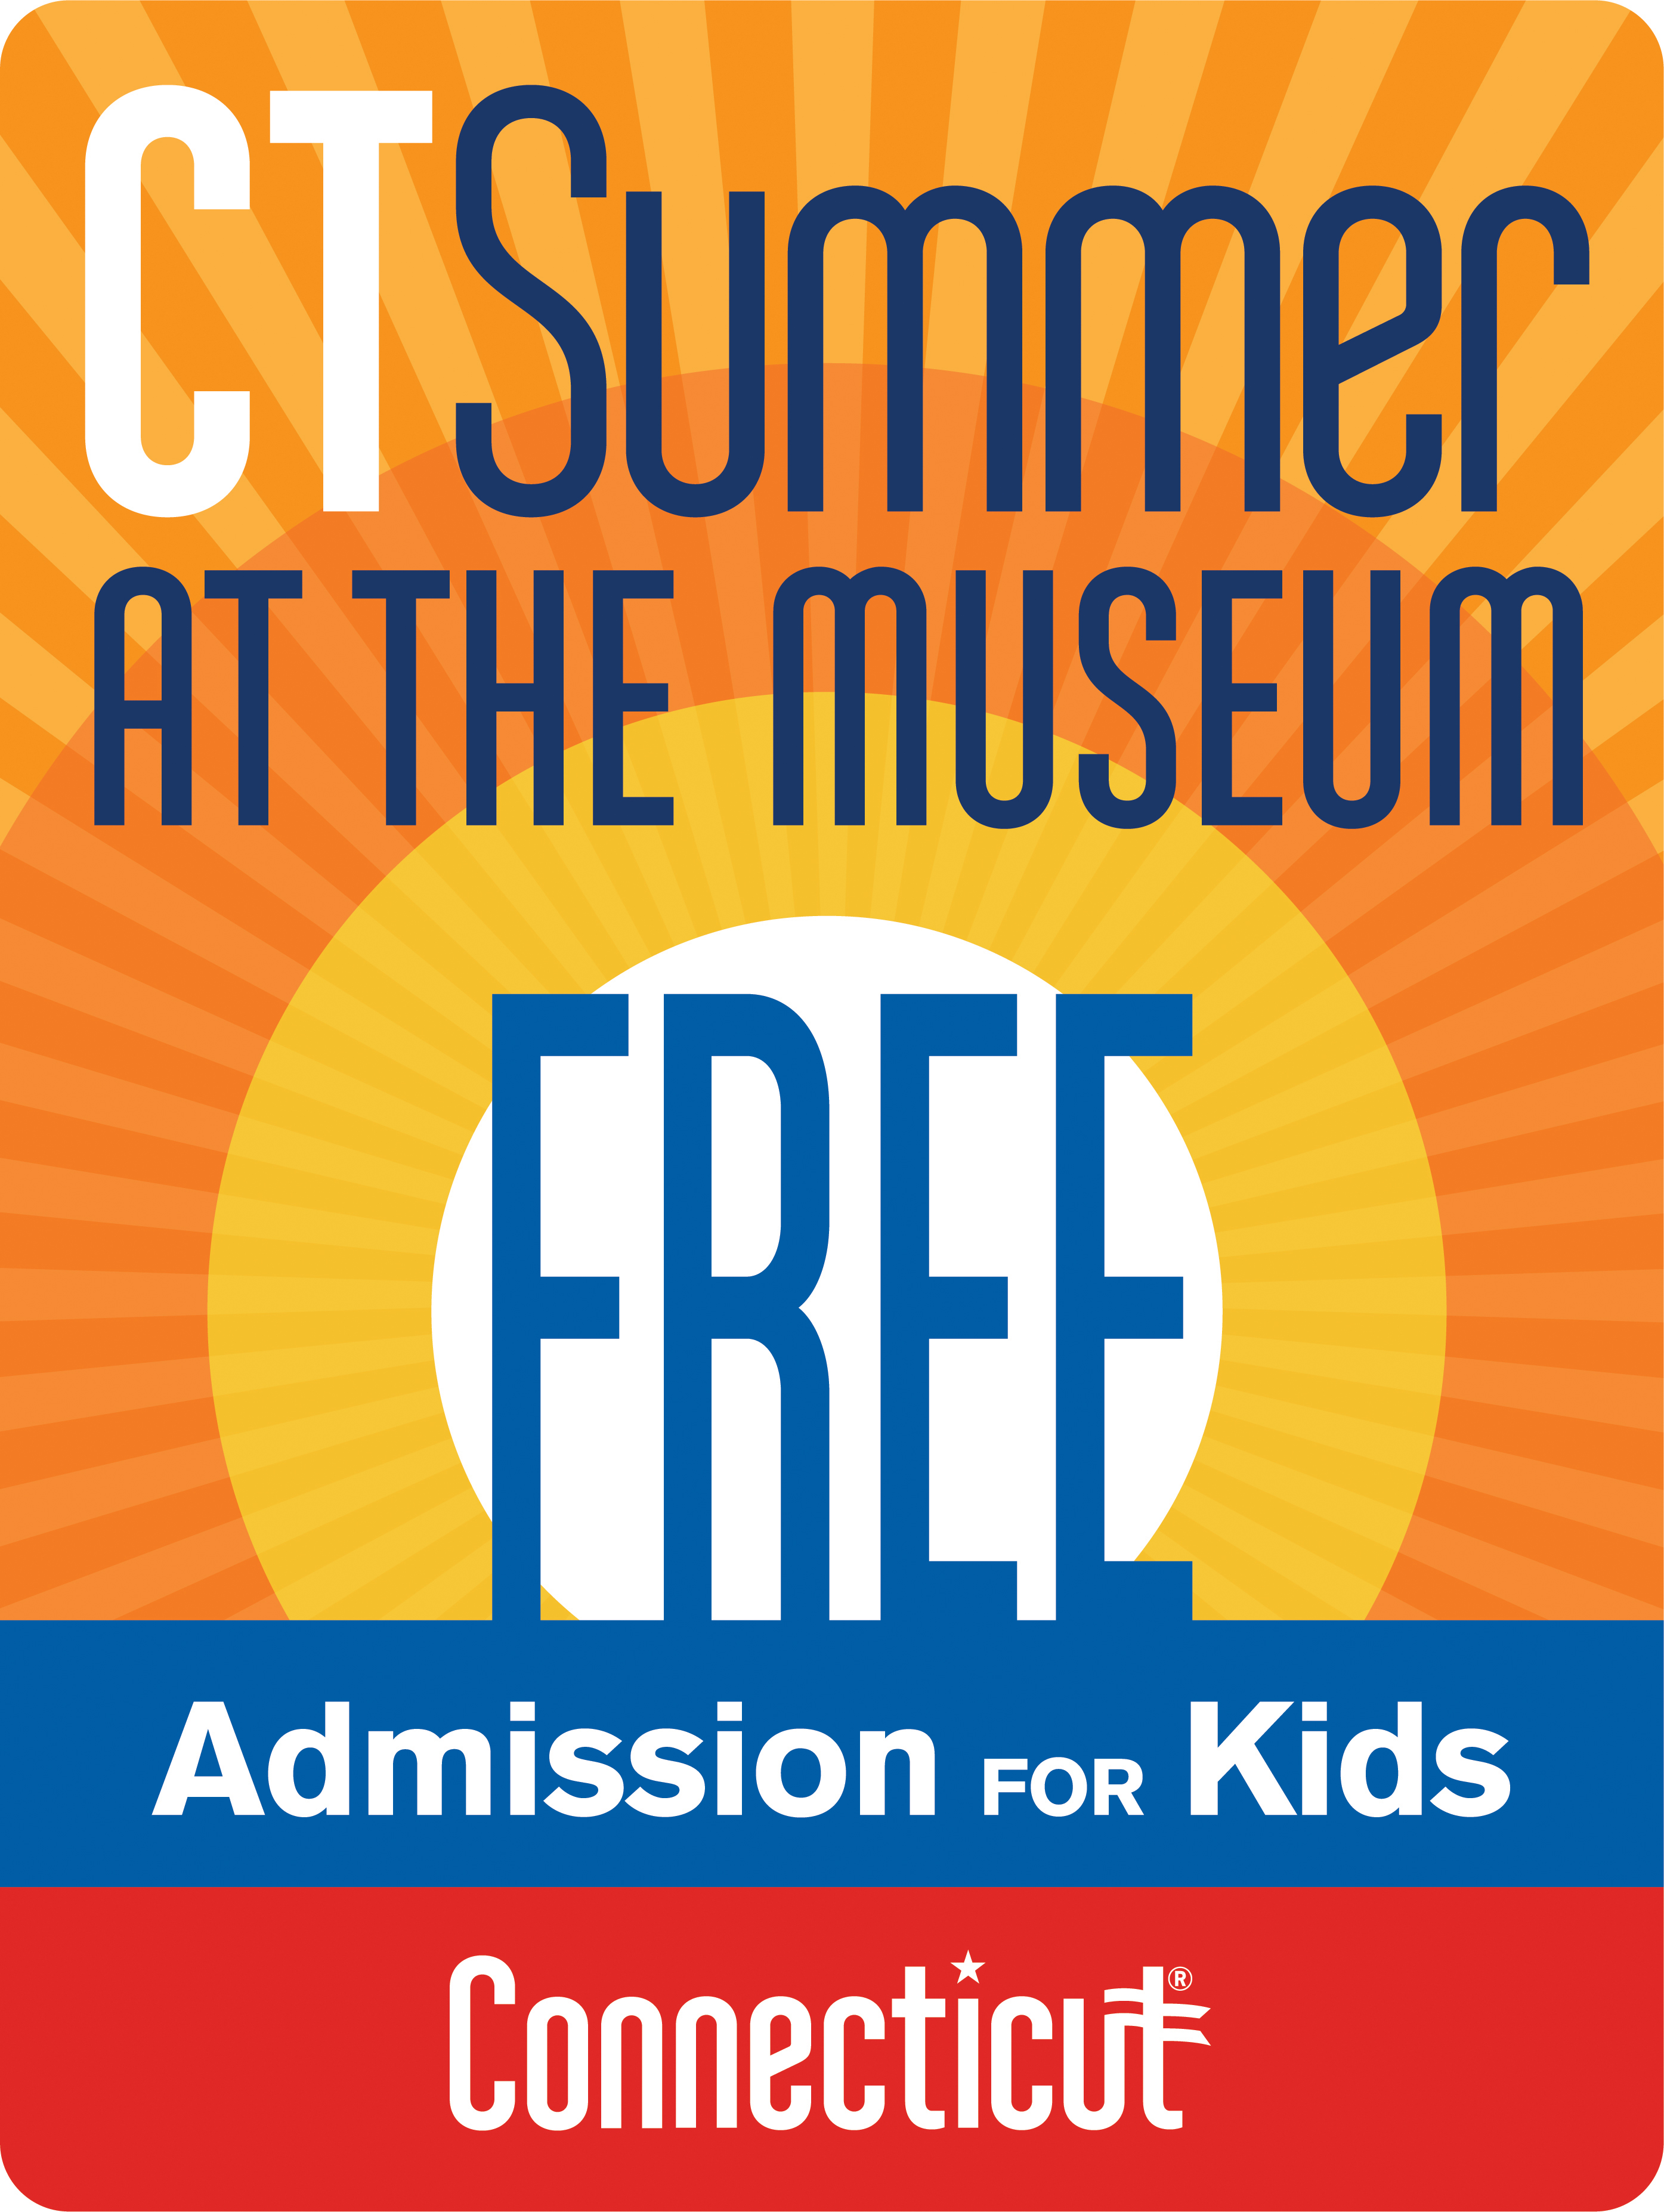 CT Summer at the Museum